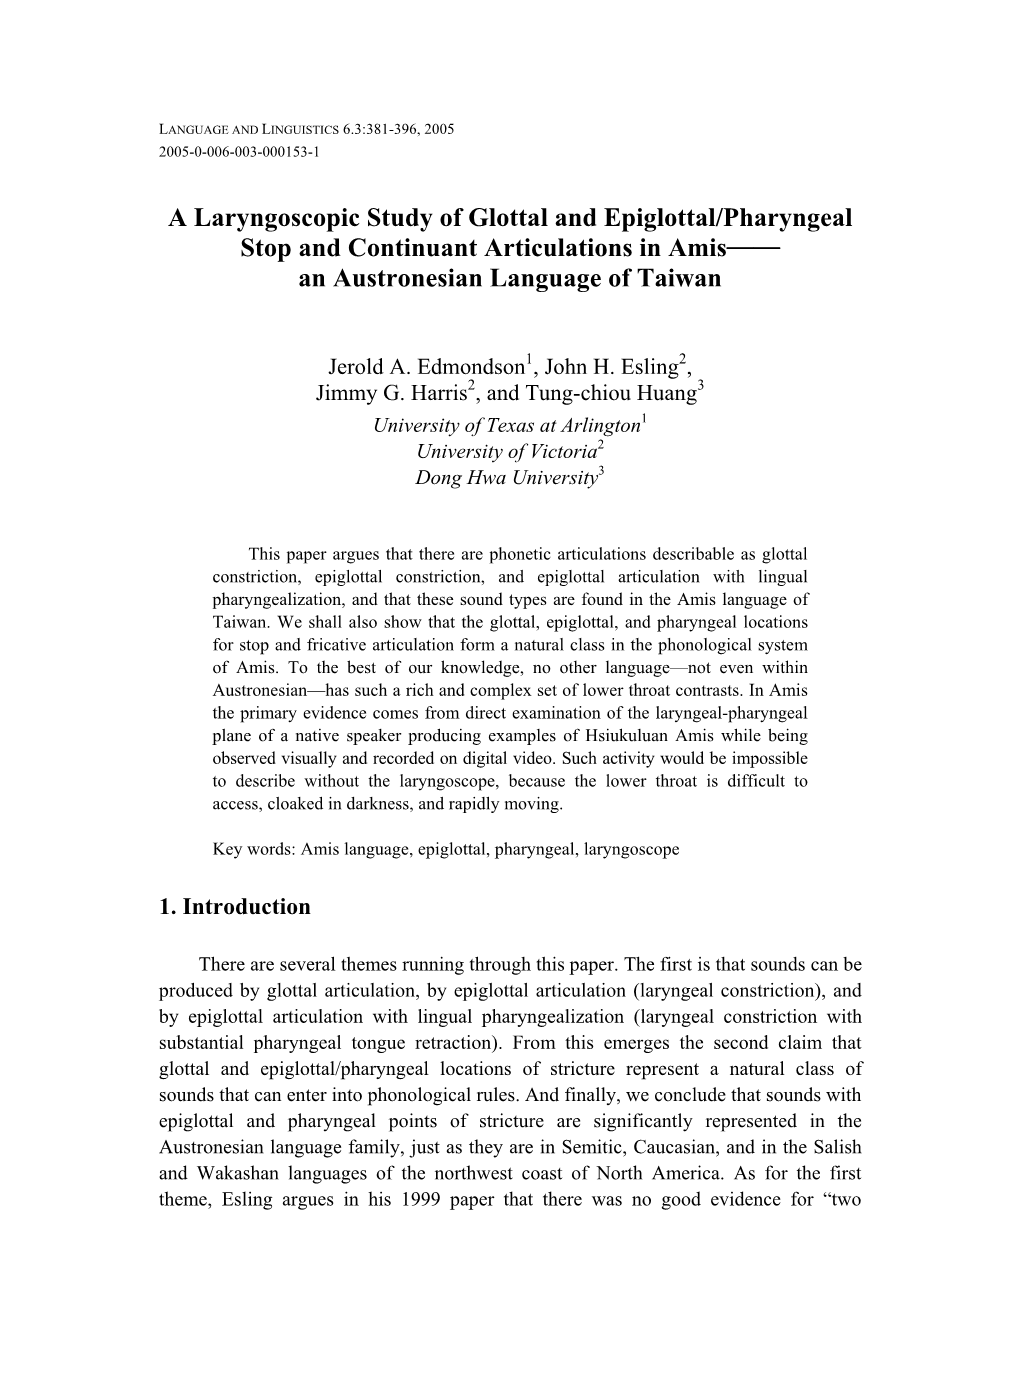 A Laryngoscopic Study of Glottal and Epiglottal/Pharyngeal Stop and Continuant Articulations in Amis an Austronesian Langu